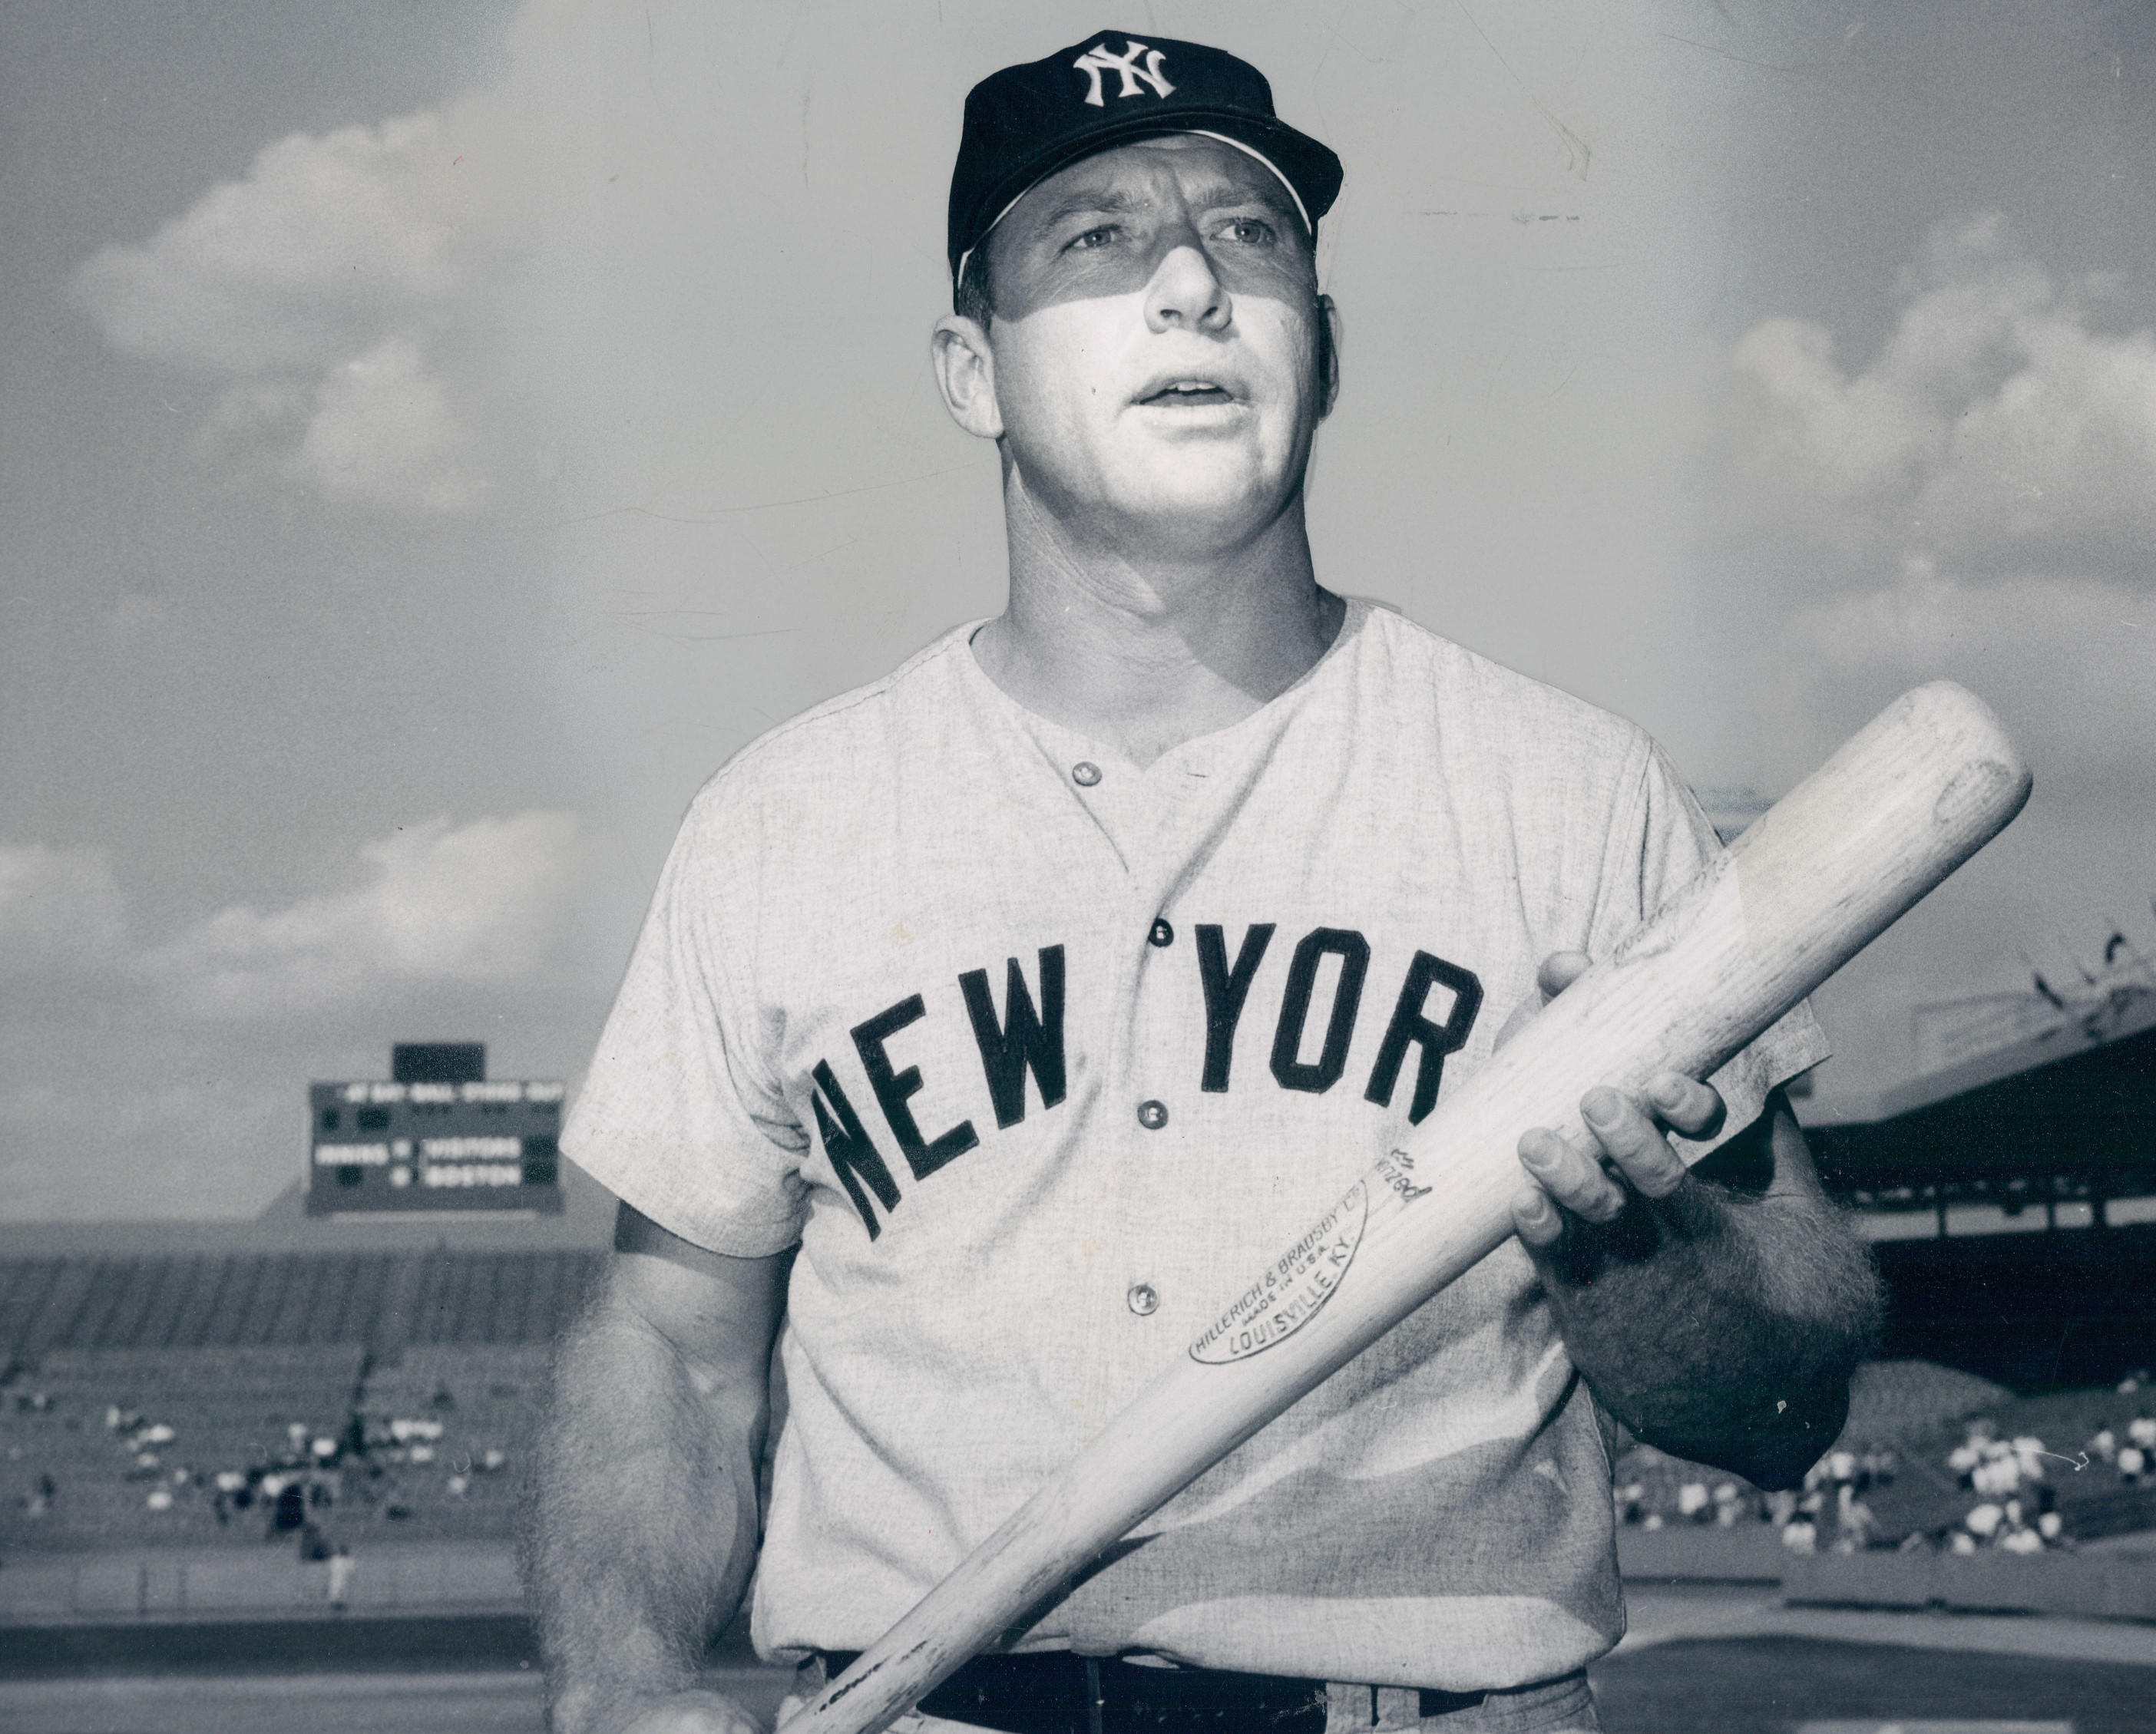 Mickey Mantle jersey from 1964 sells for record $1.32 million